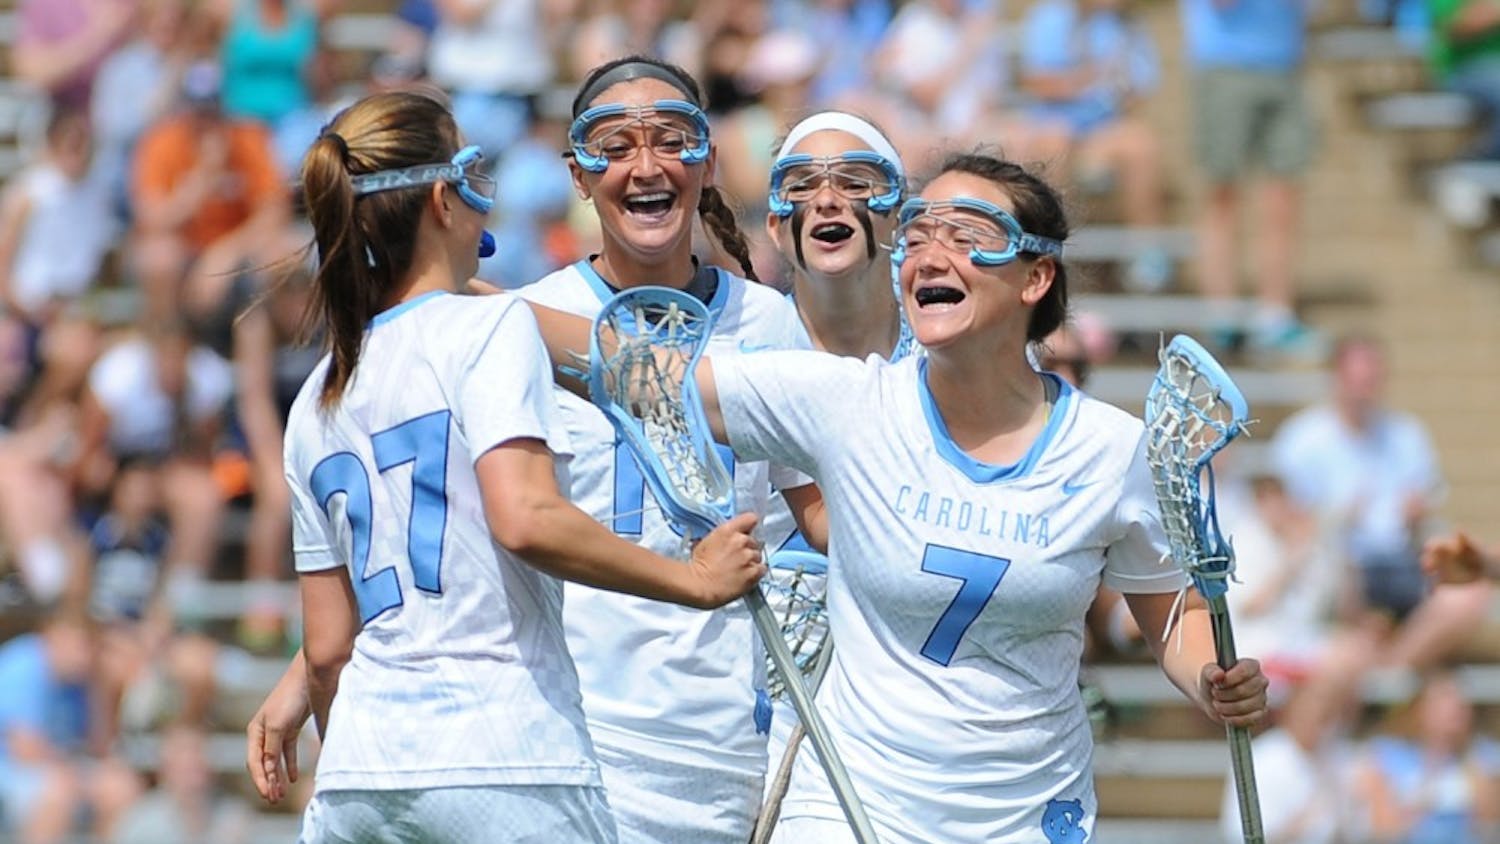 UNC attackers Aly Messinger (27), Sydney Holman (10), Molly Hendrick (20), and Am McGee (7) celebrate after defeating Maryland 17-15.